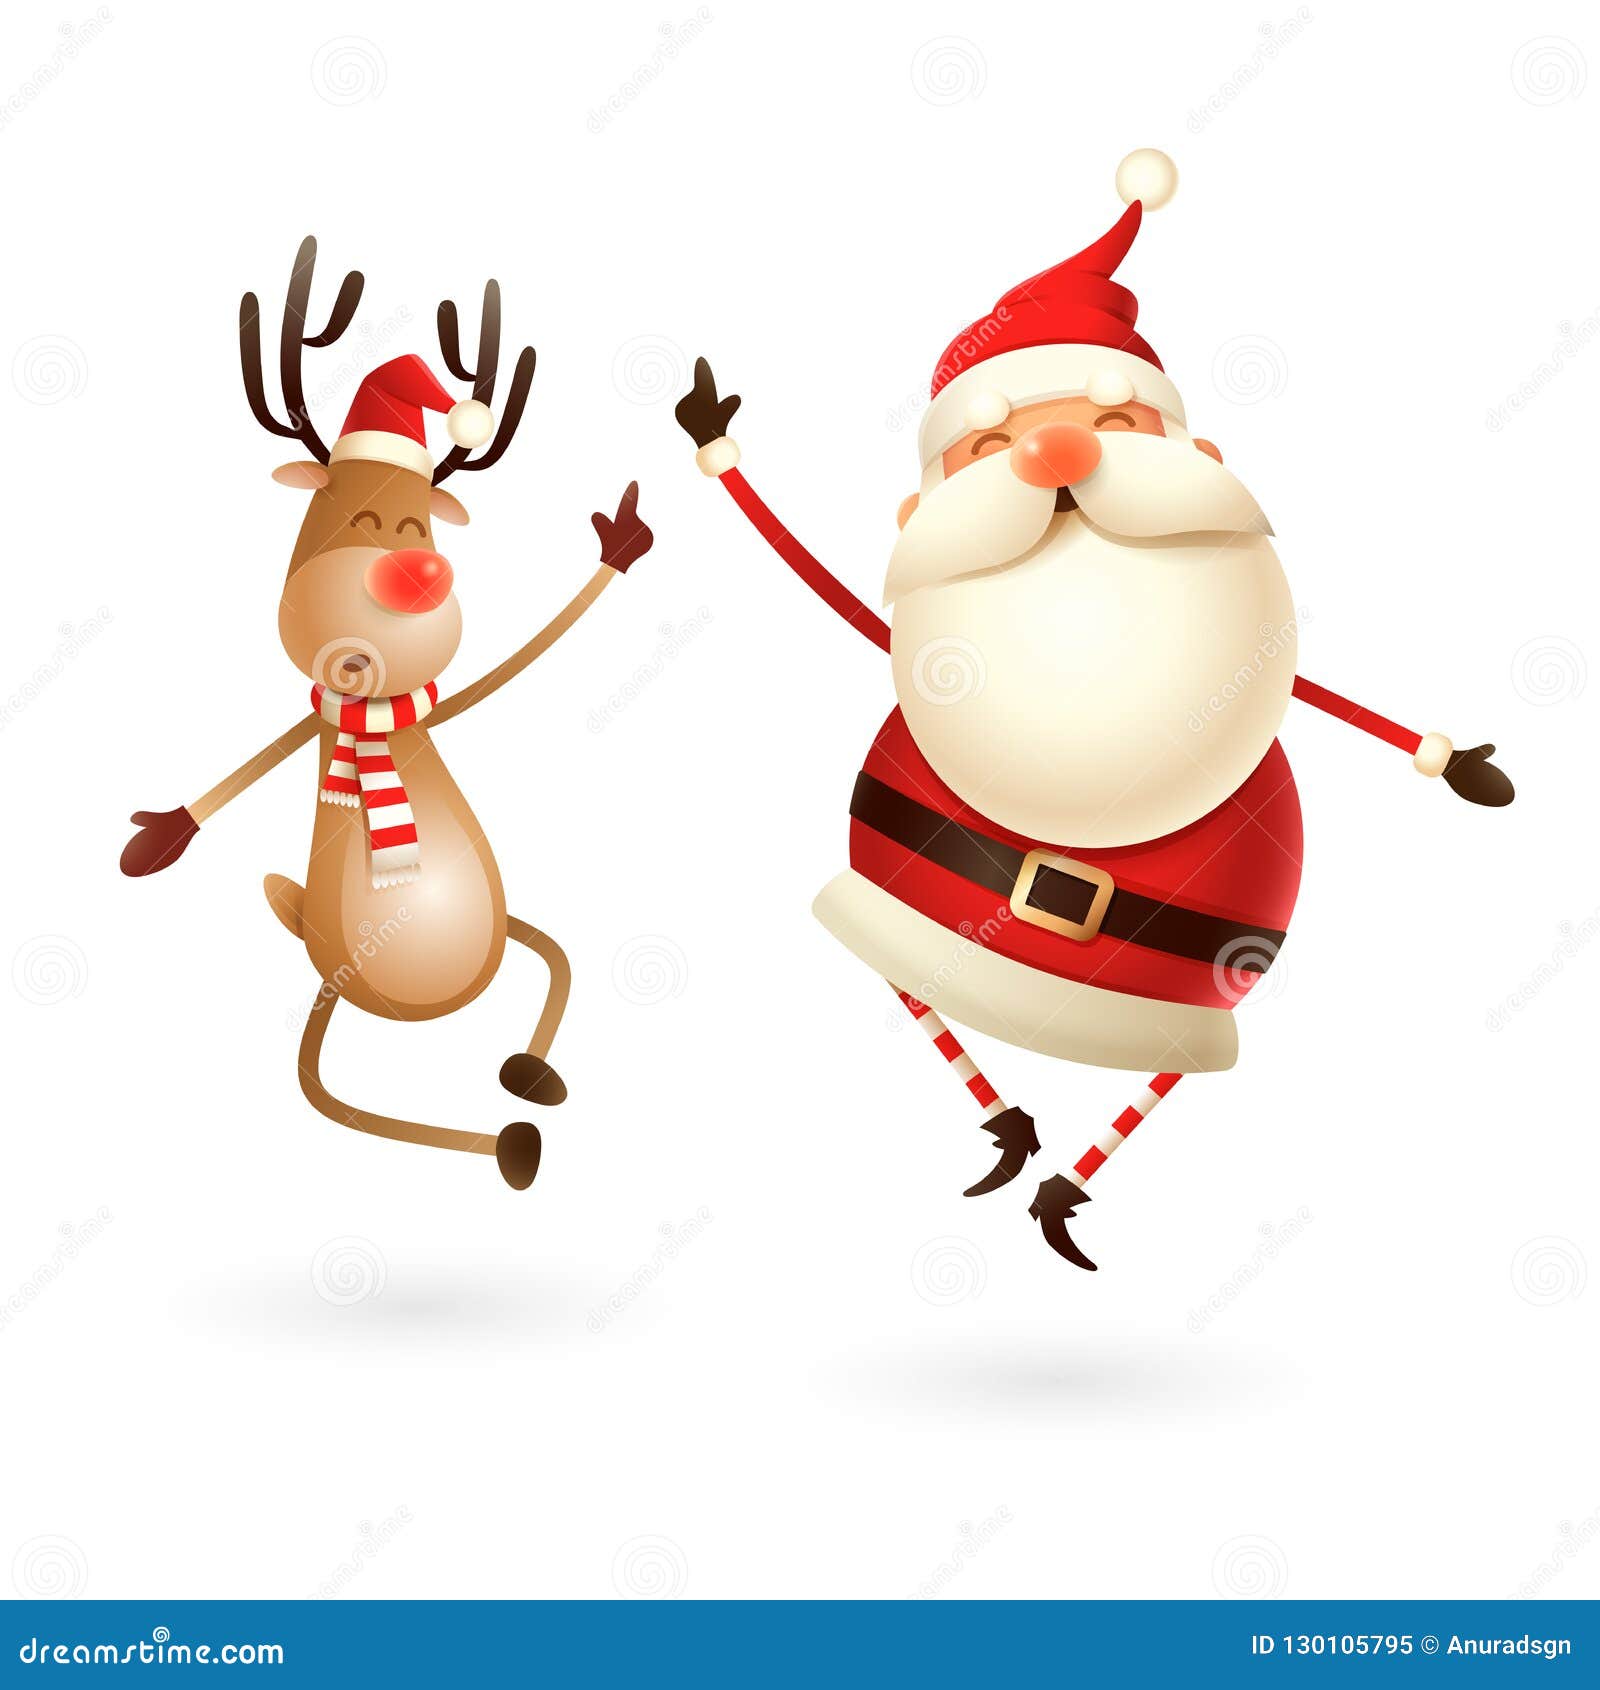 happy expresion of santa claus and reindeer - they jumping straight up and bring their heels clapping together right under